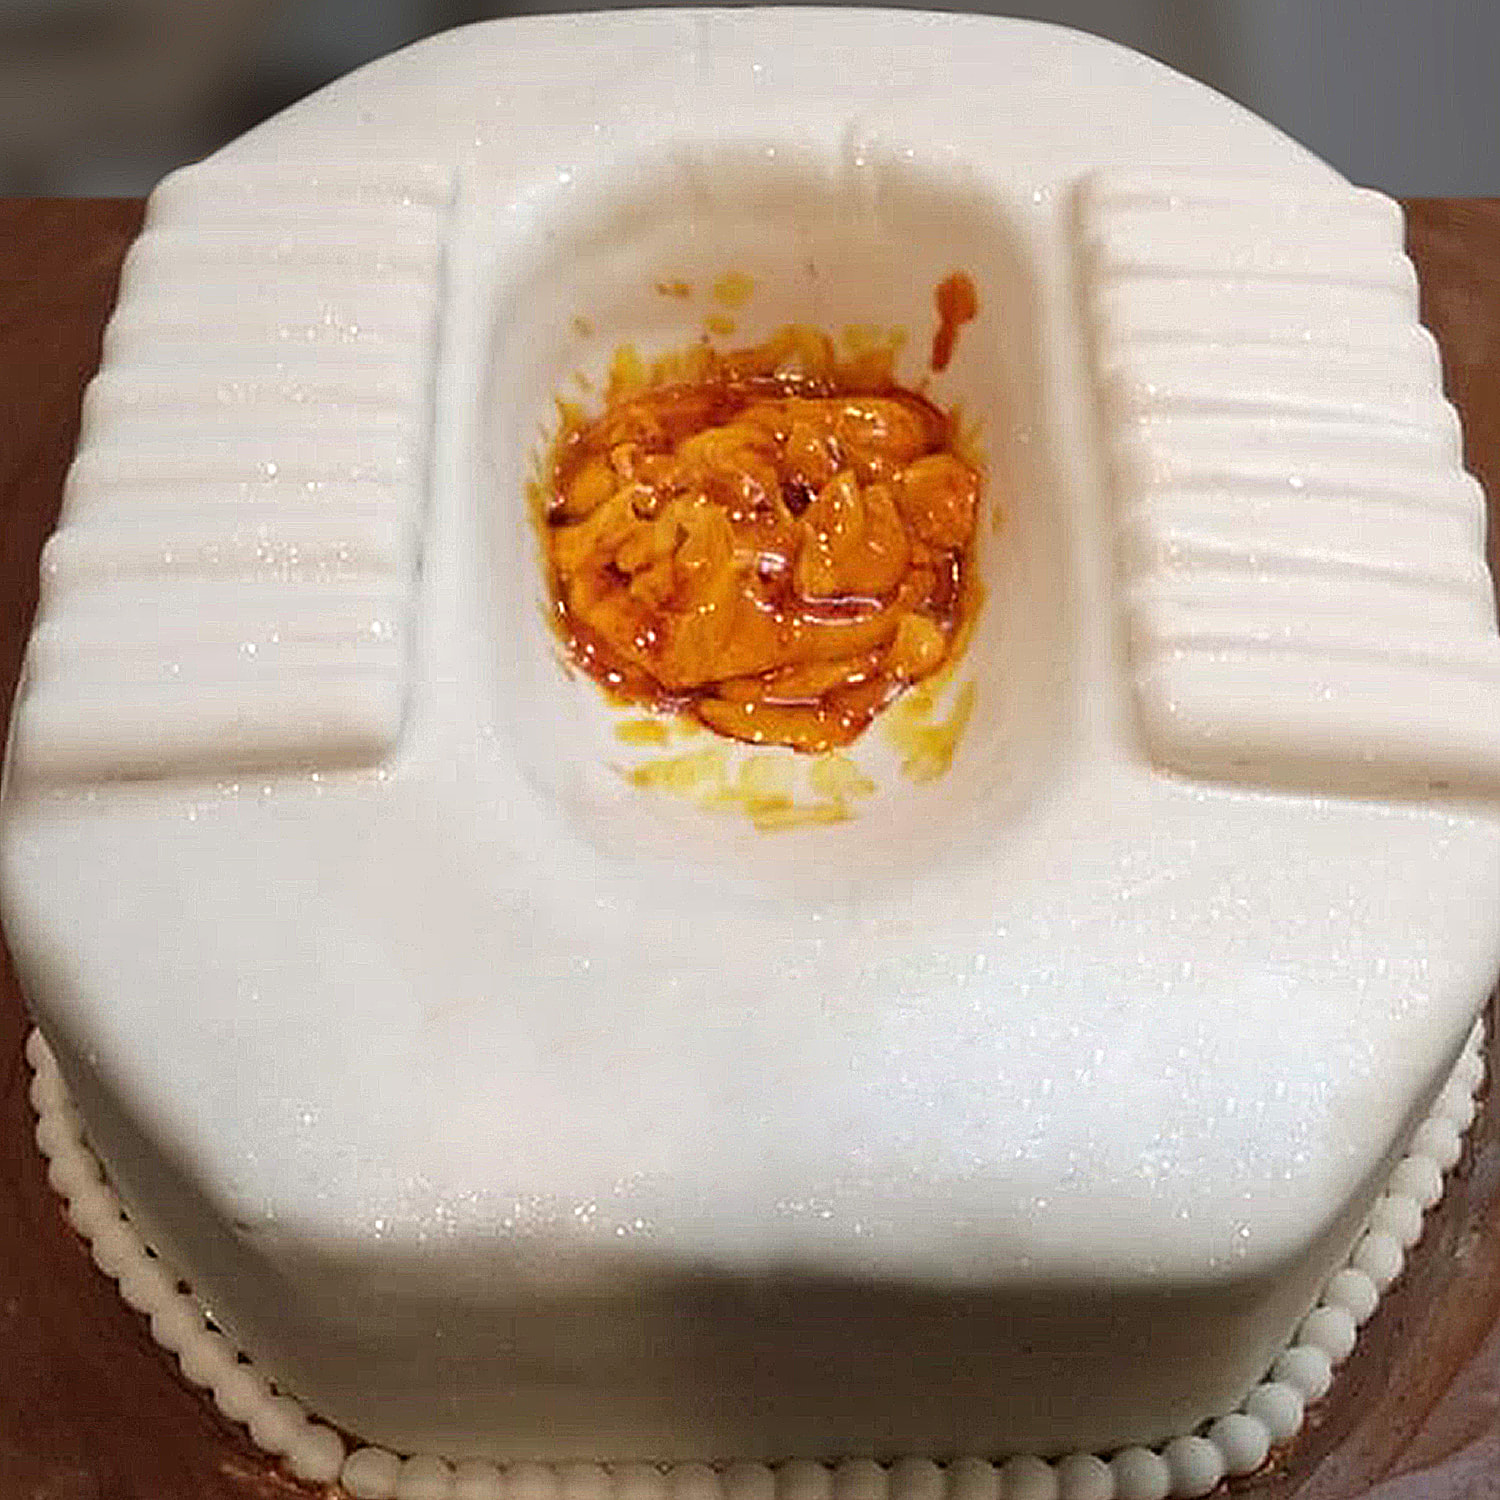 Toilet Paper Cakes Are Trending in the Hudson Valley During Self-Isolation